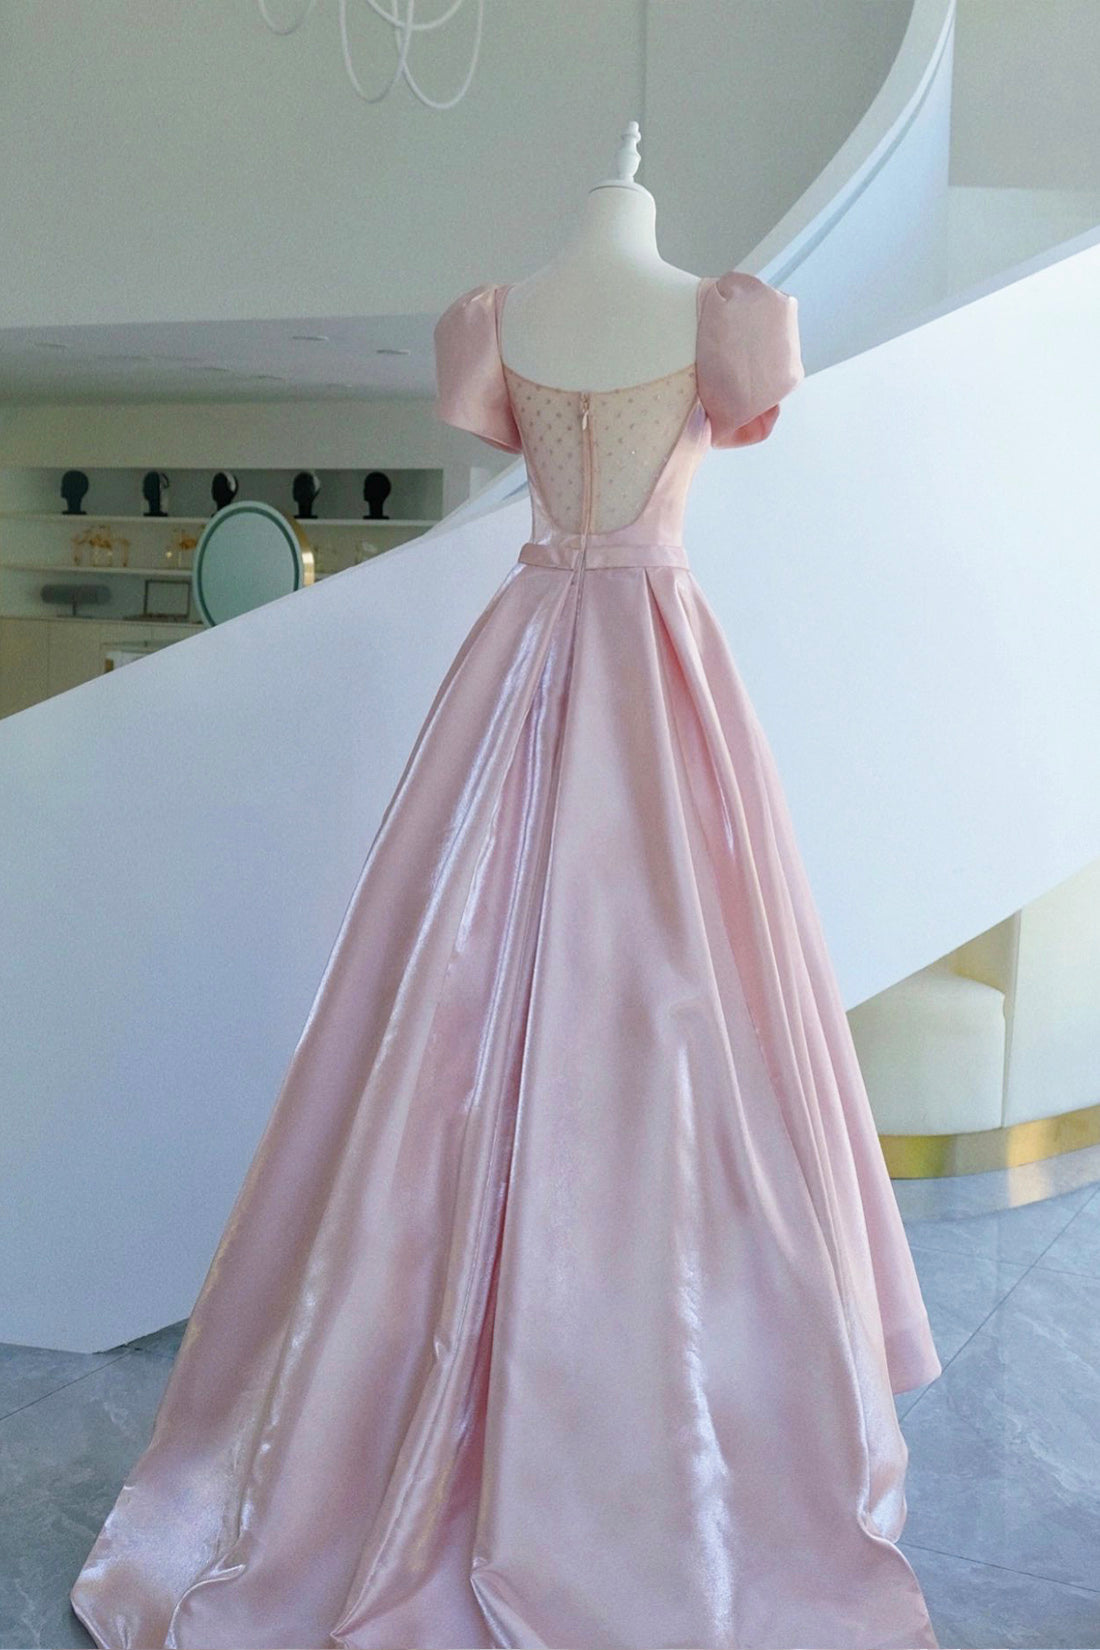 Black Bridesmaid Dress, Pink Satin Long Prom Dress, A-Line Evening Dress with Bow